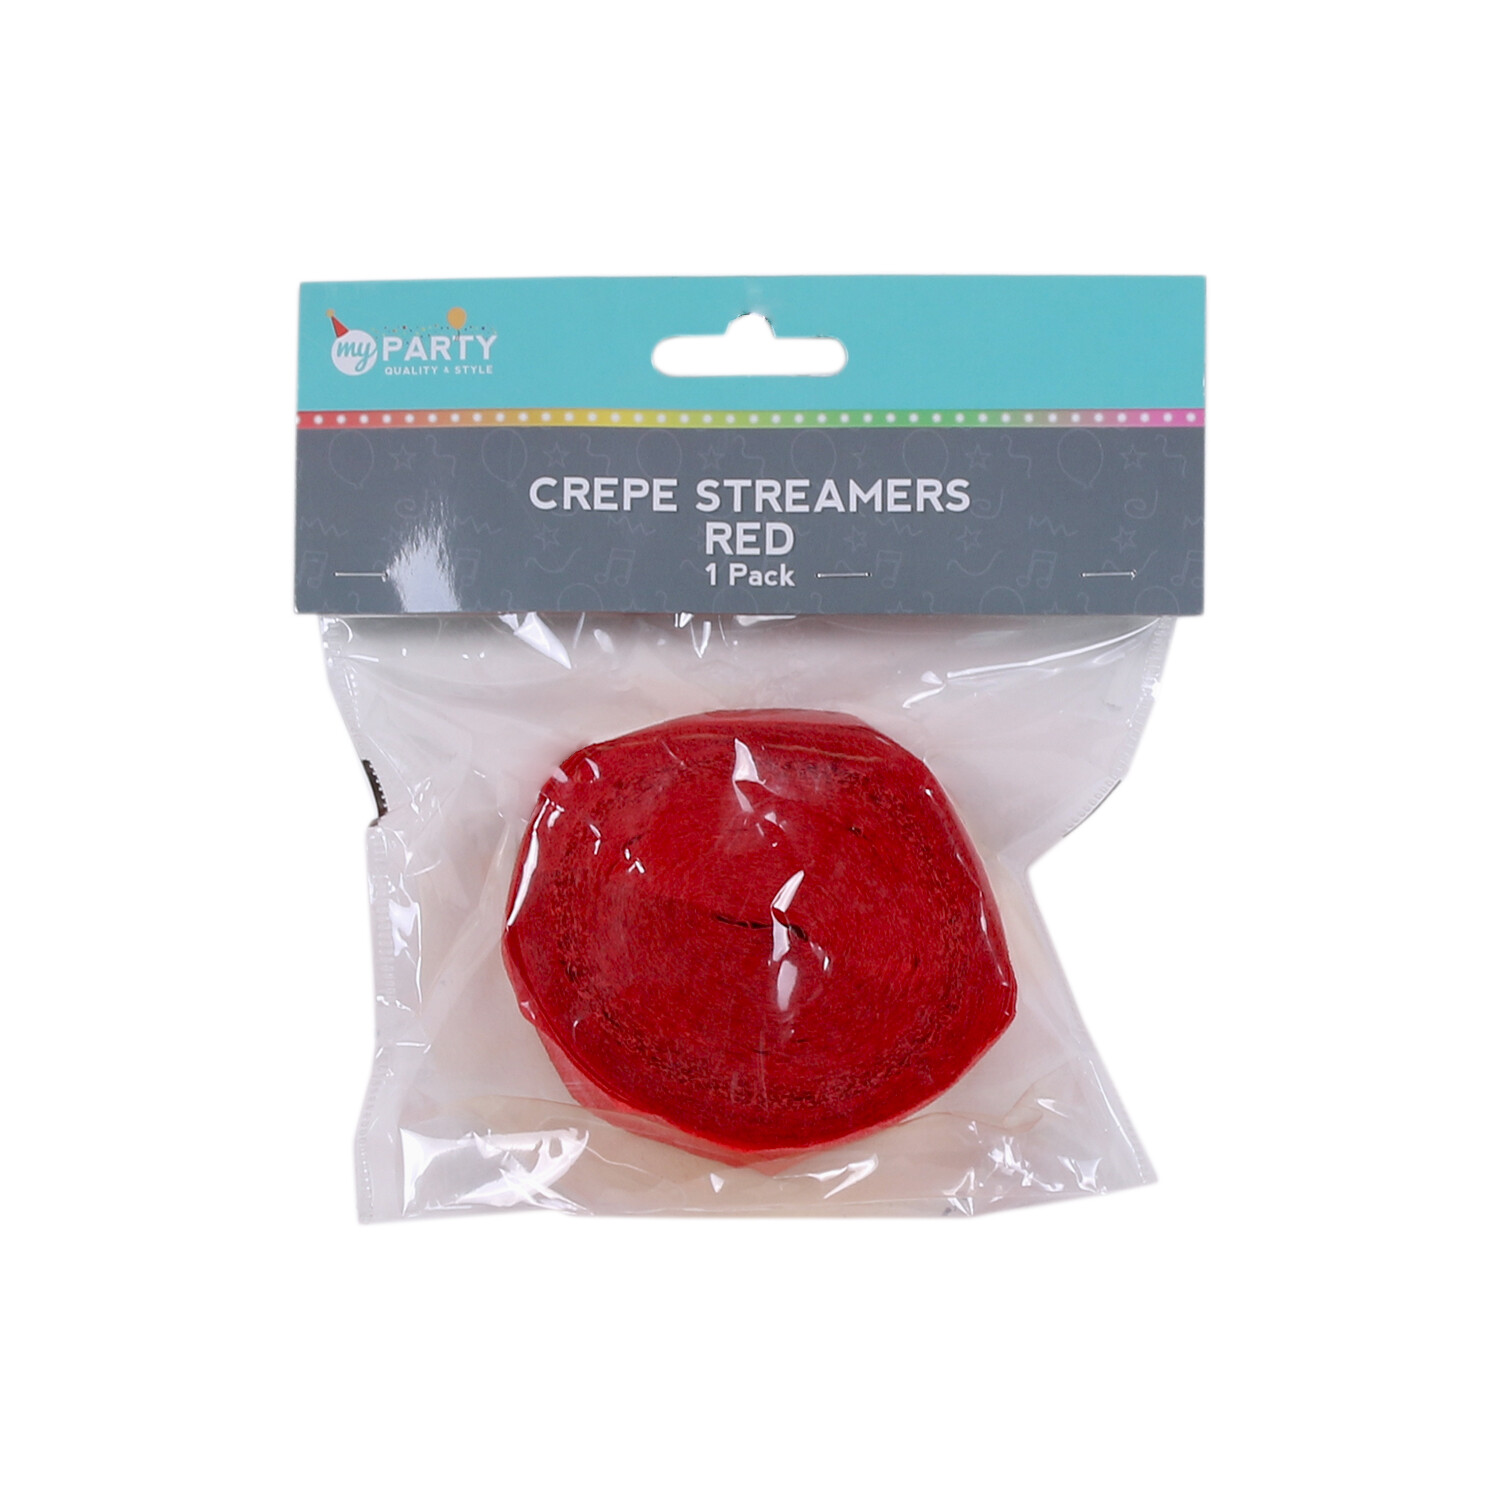 Crepe Streamer Roll - Red Image